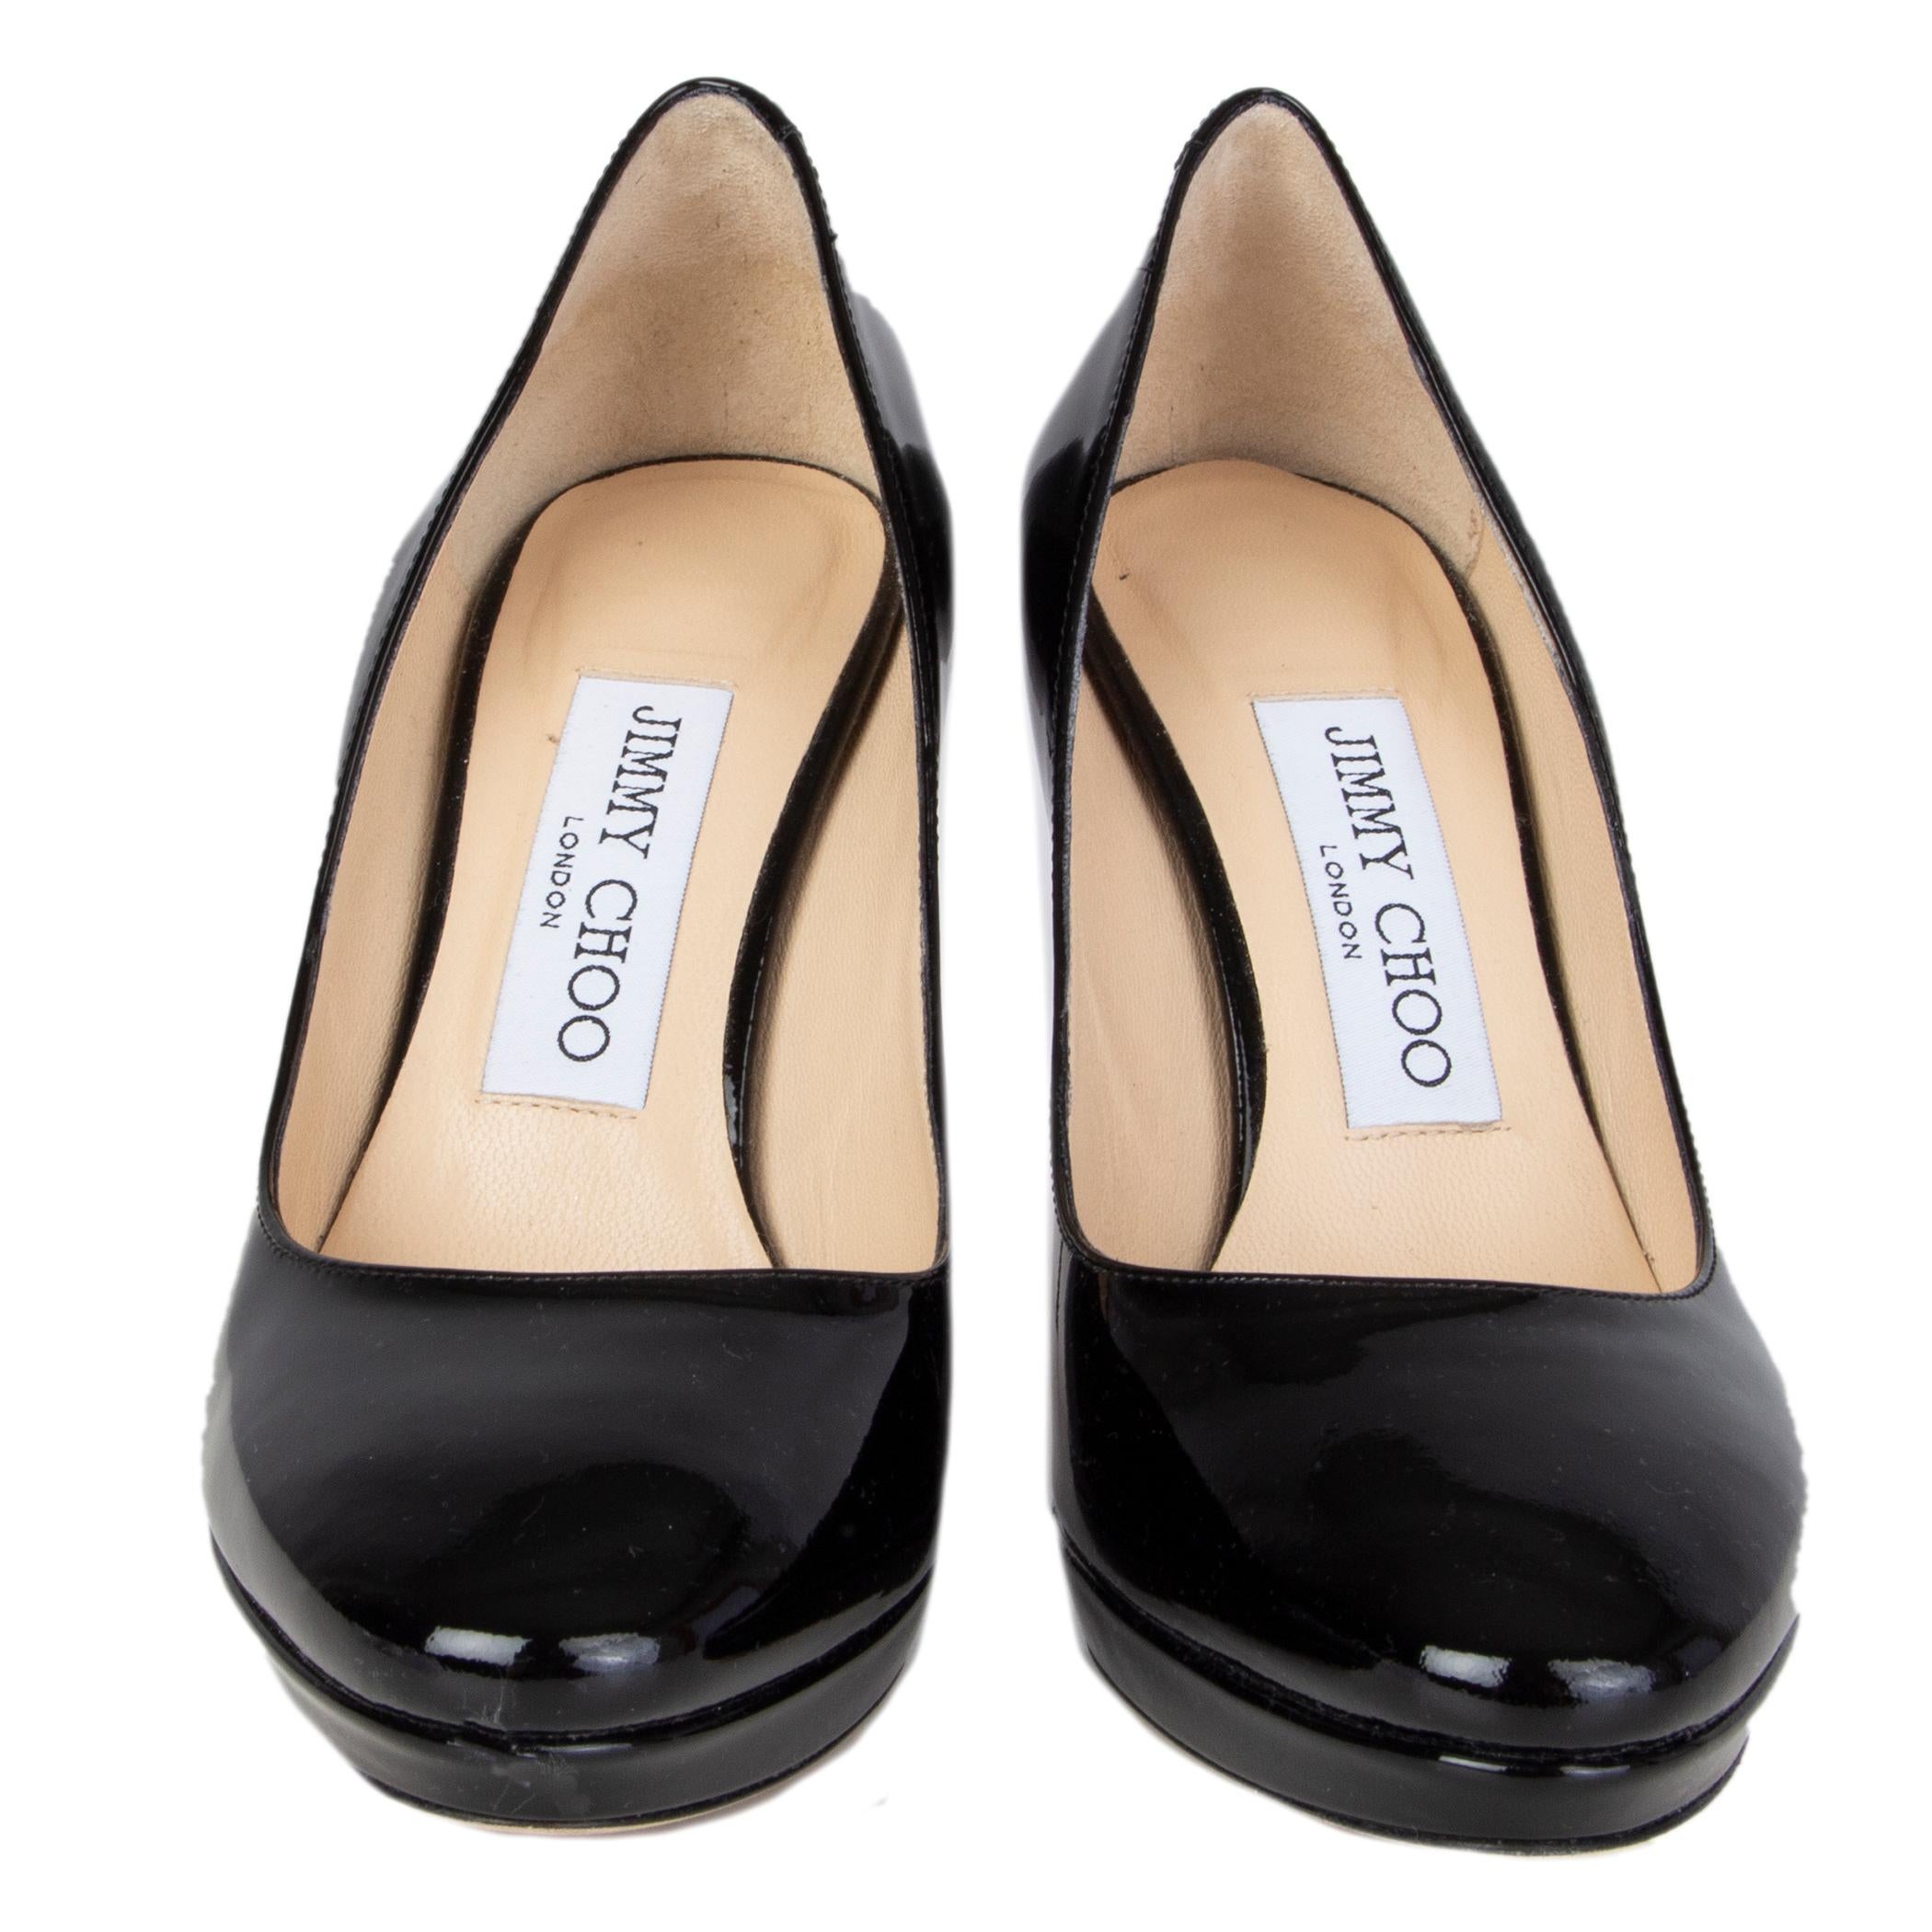 100% authentic Jimmy Choo platform pumps in black patent leather. Have been worn and are in excellent condition. 

Measurements
Imprinted Size	35
Shoe Size	35
Inside Sole	22.5cm (8.8in)
Width	7cm (2.7in)
Heel	9.5cm (3.7in)
Platform:	12cm